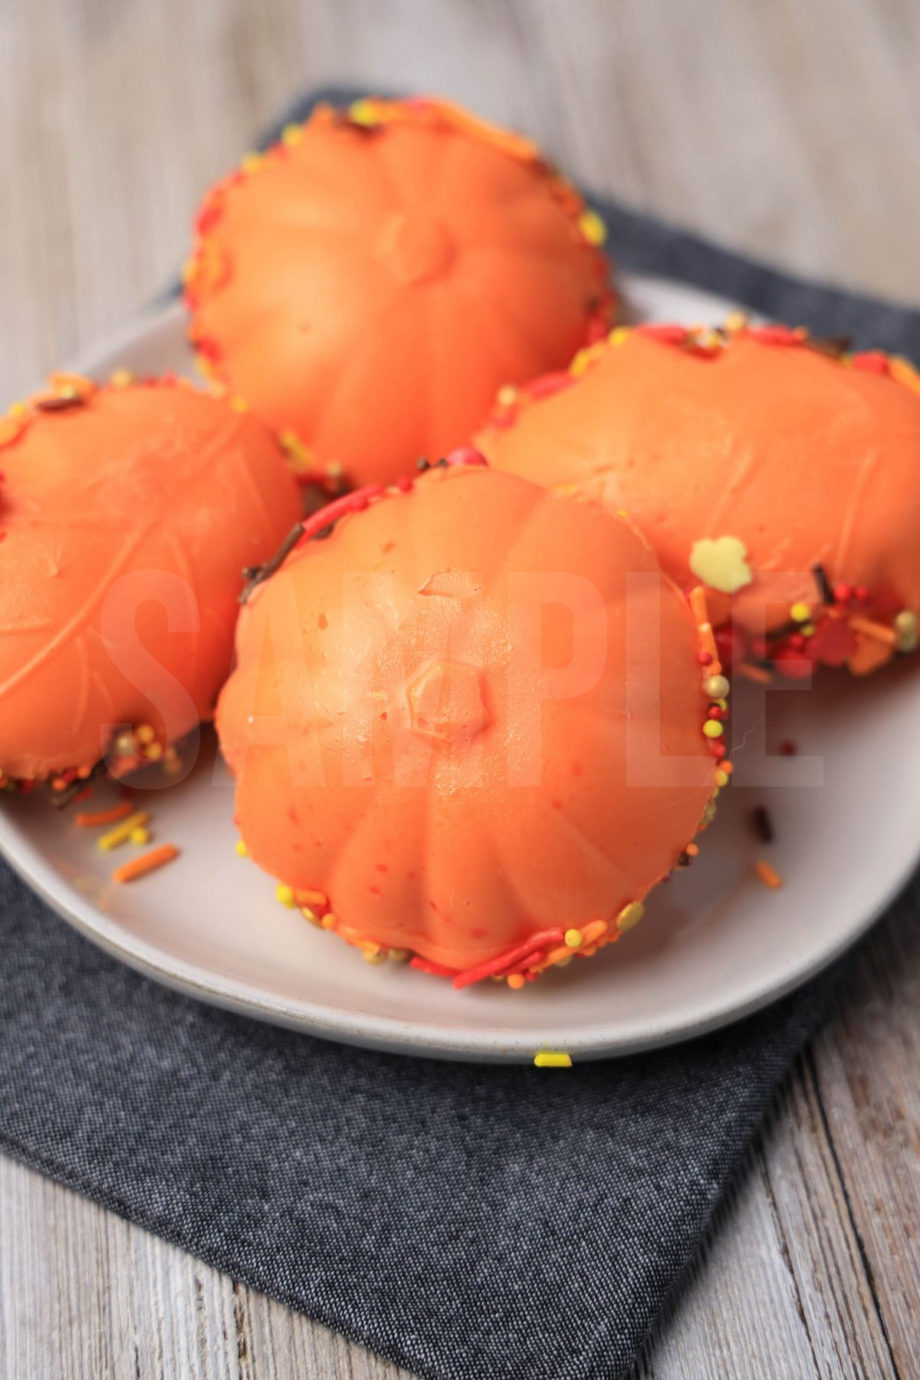 The Fall Pumpkin Spiced Chocolate Bomb comes on white plate with a denim napkin on a rustic wood backdrop.